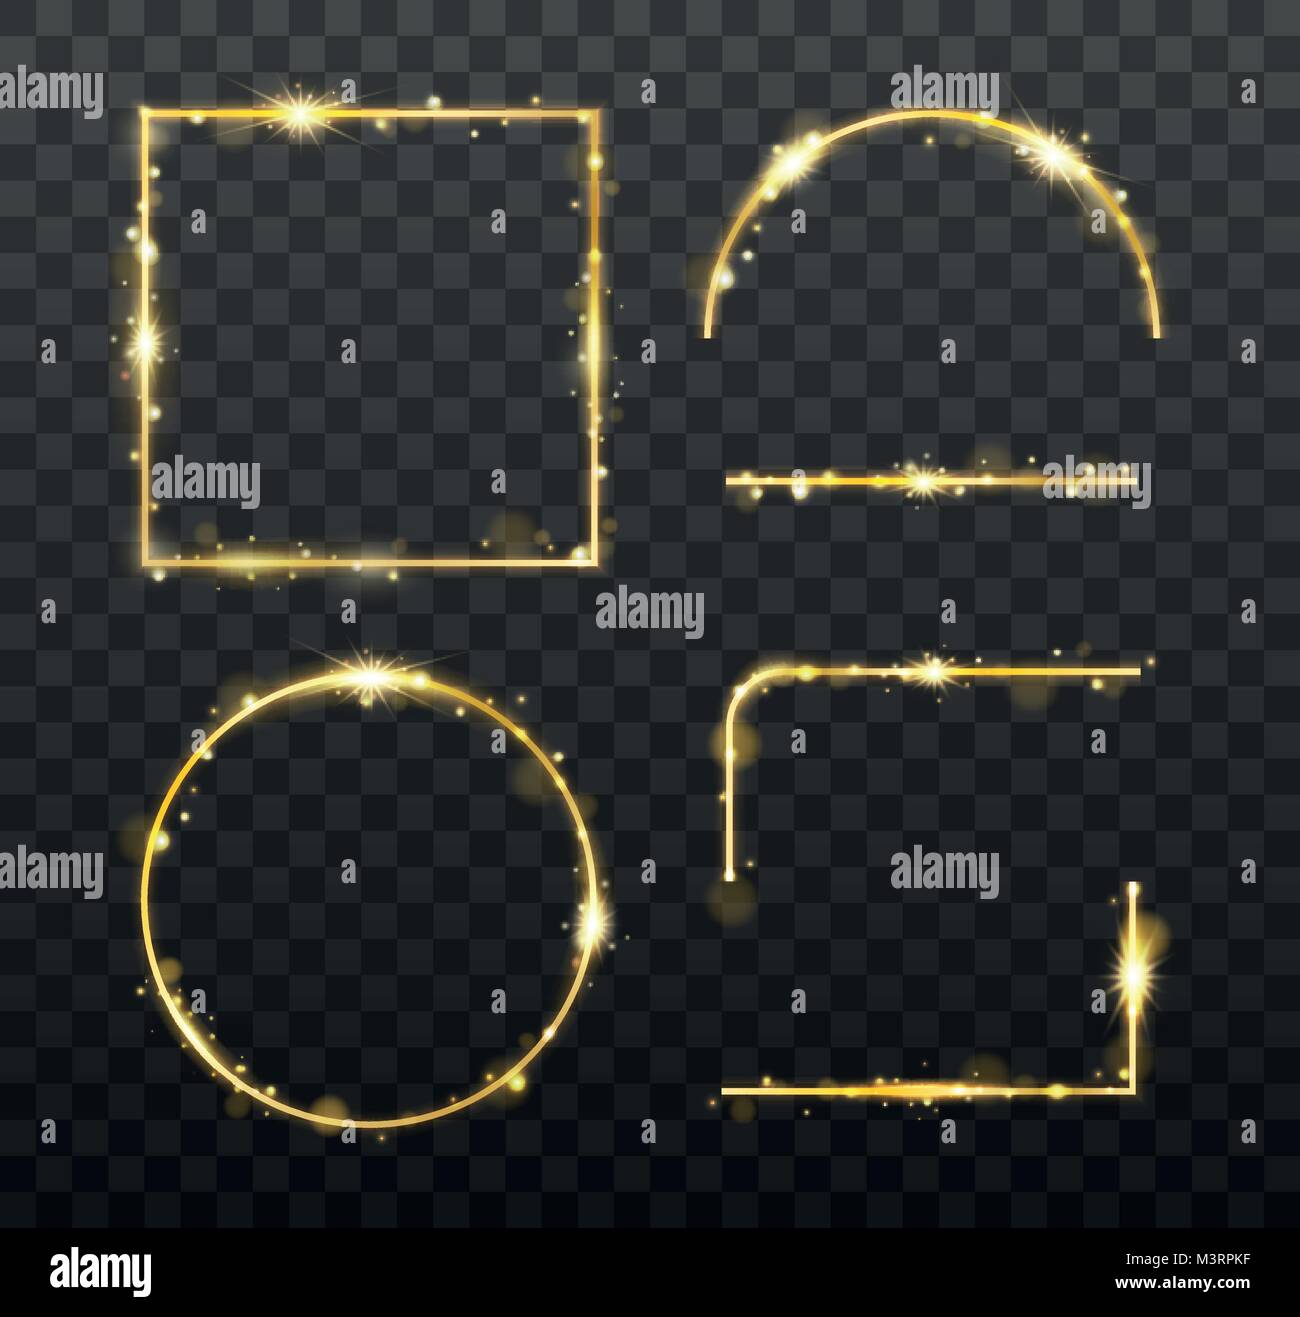 Golden glowing frames and elements with shiny sparks. Decorative element for banner or templates on transparent background. vector illustration Stock Vector